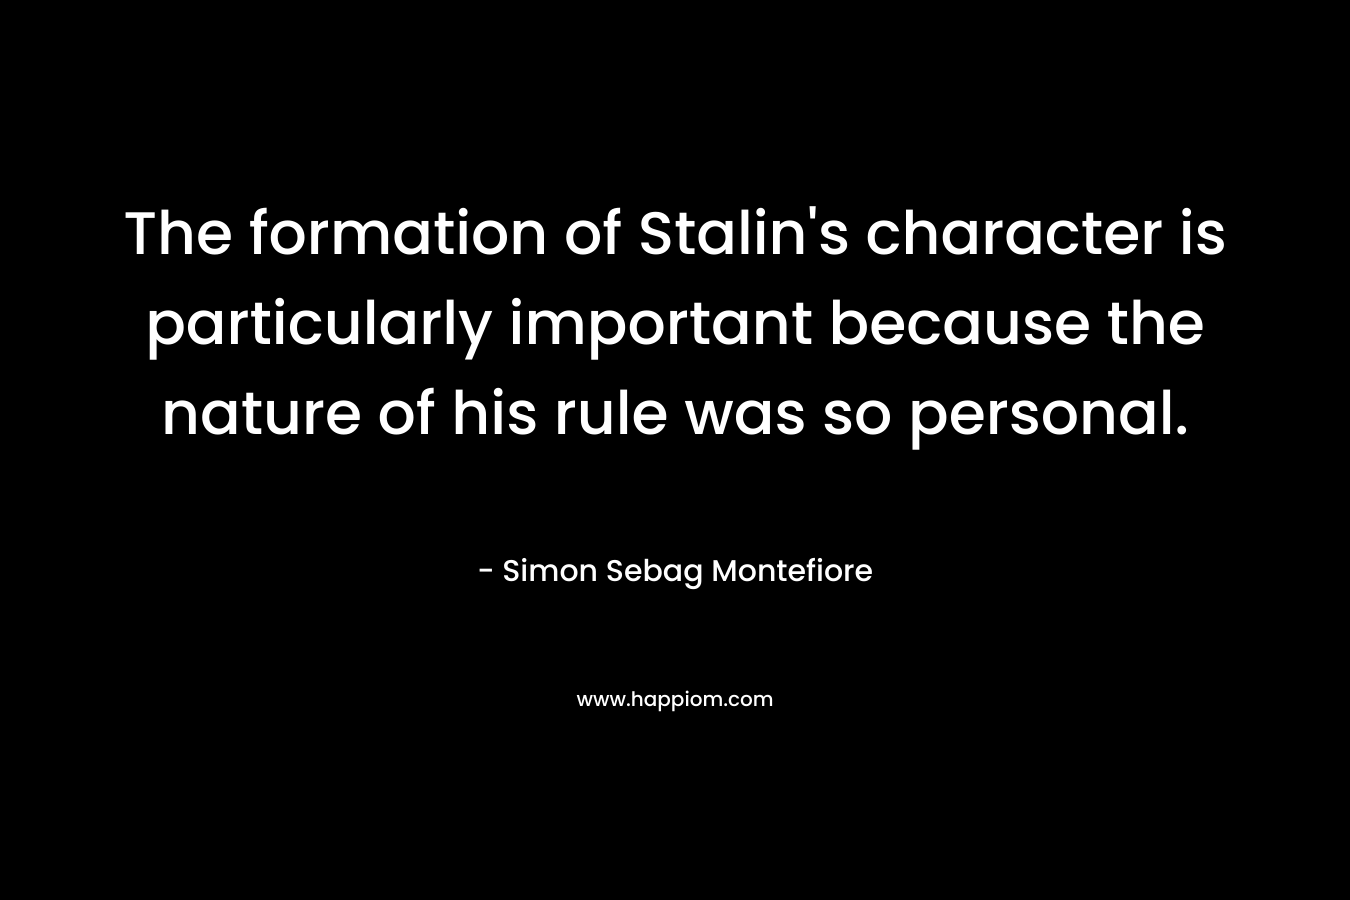 The formation of Stalin’s character is particularly important because the nature of his rule was so personal. – Simon Sebag Montefiore